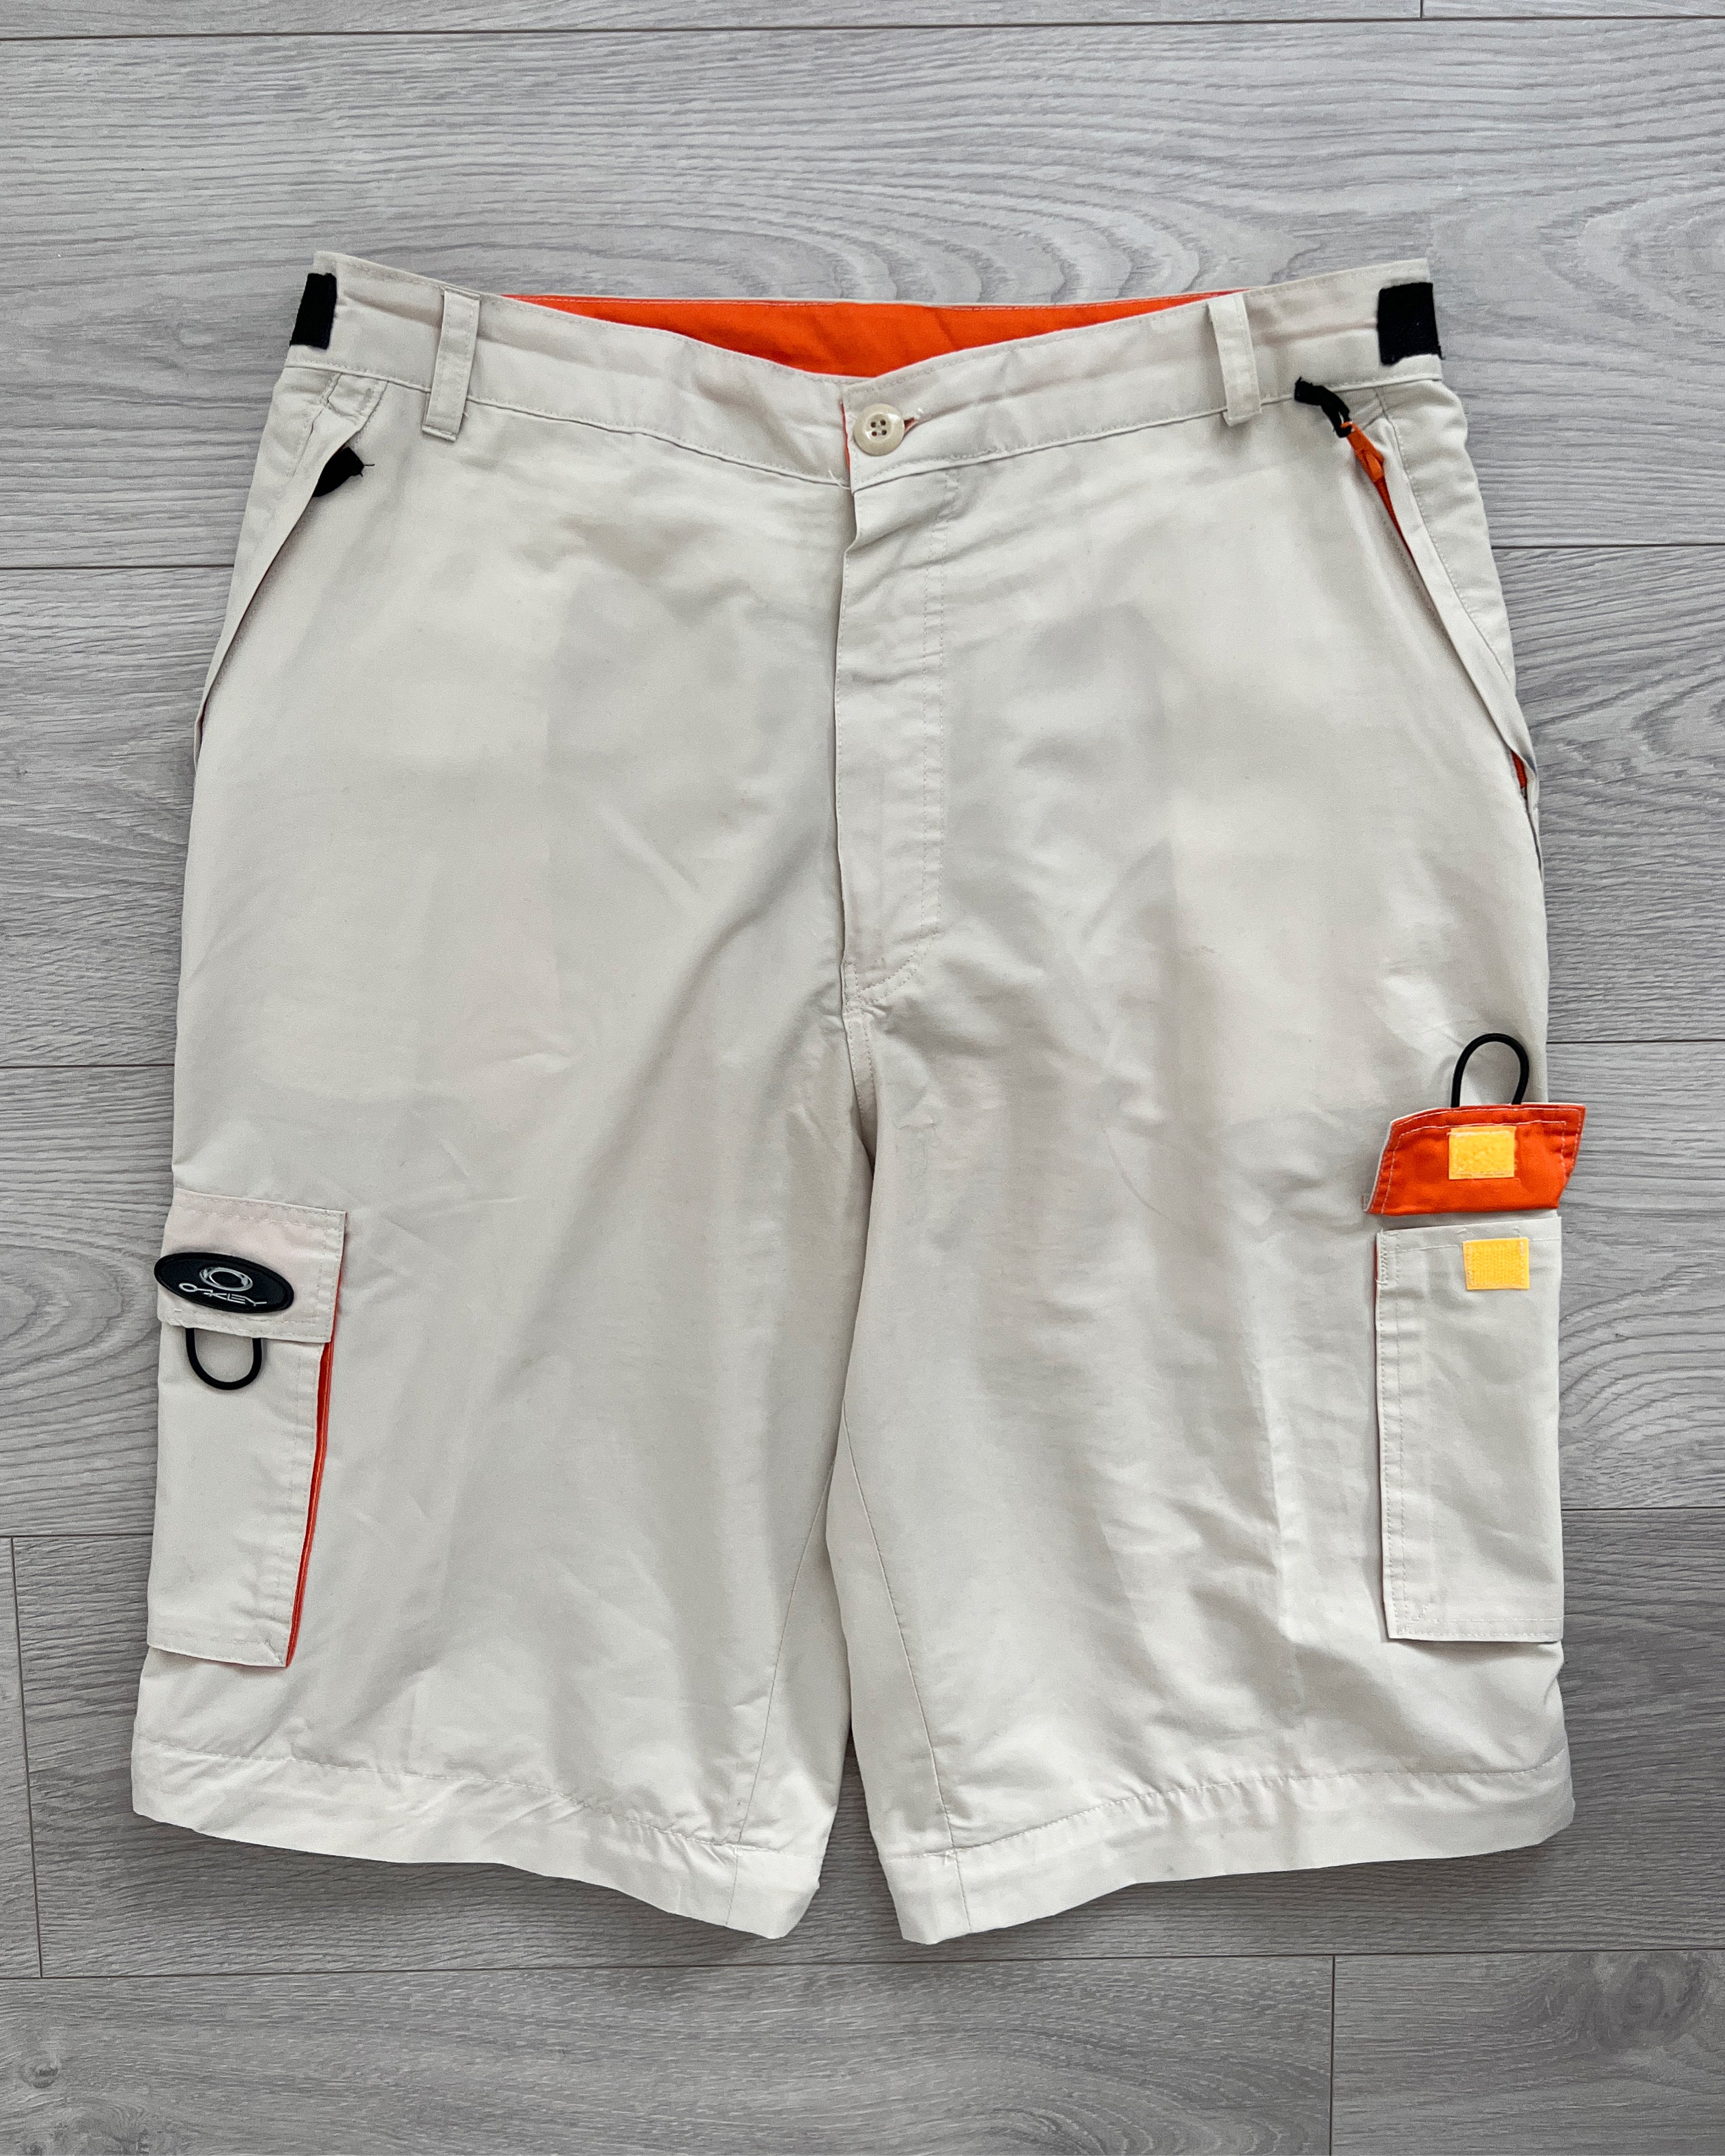 Oakley Software 00s 2-in-1 Technical Cargo Pants Shorts - Size 34 